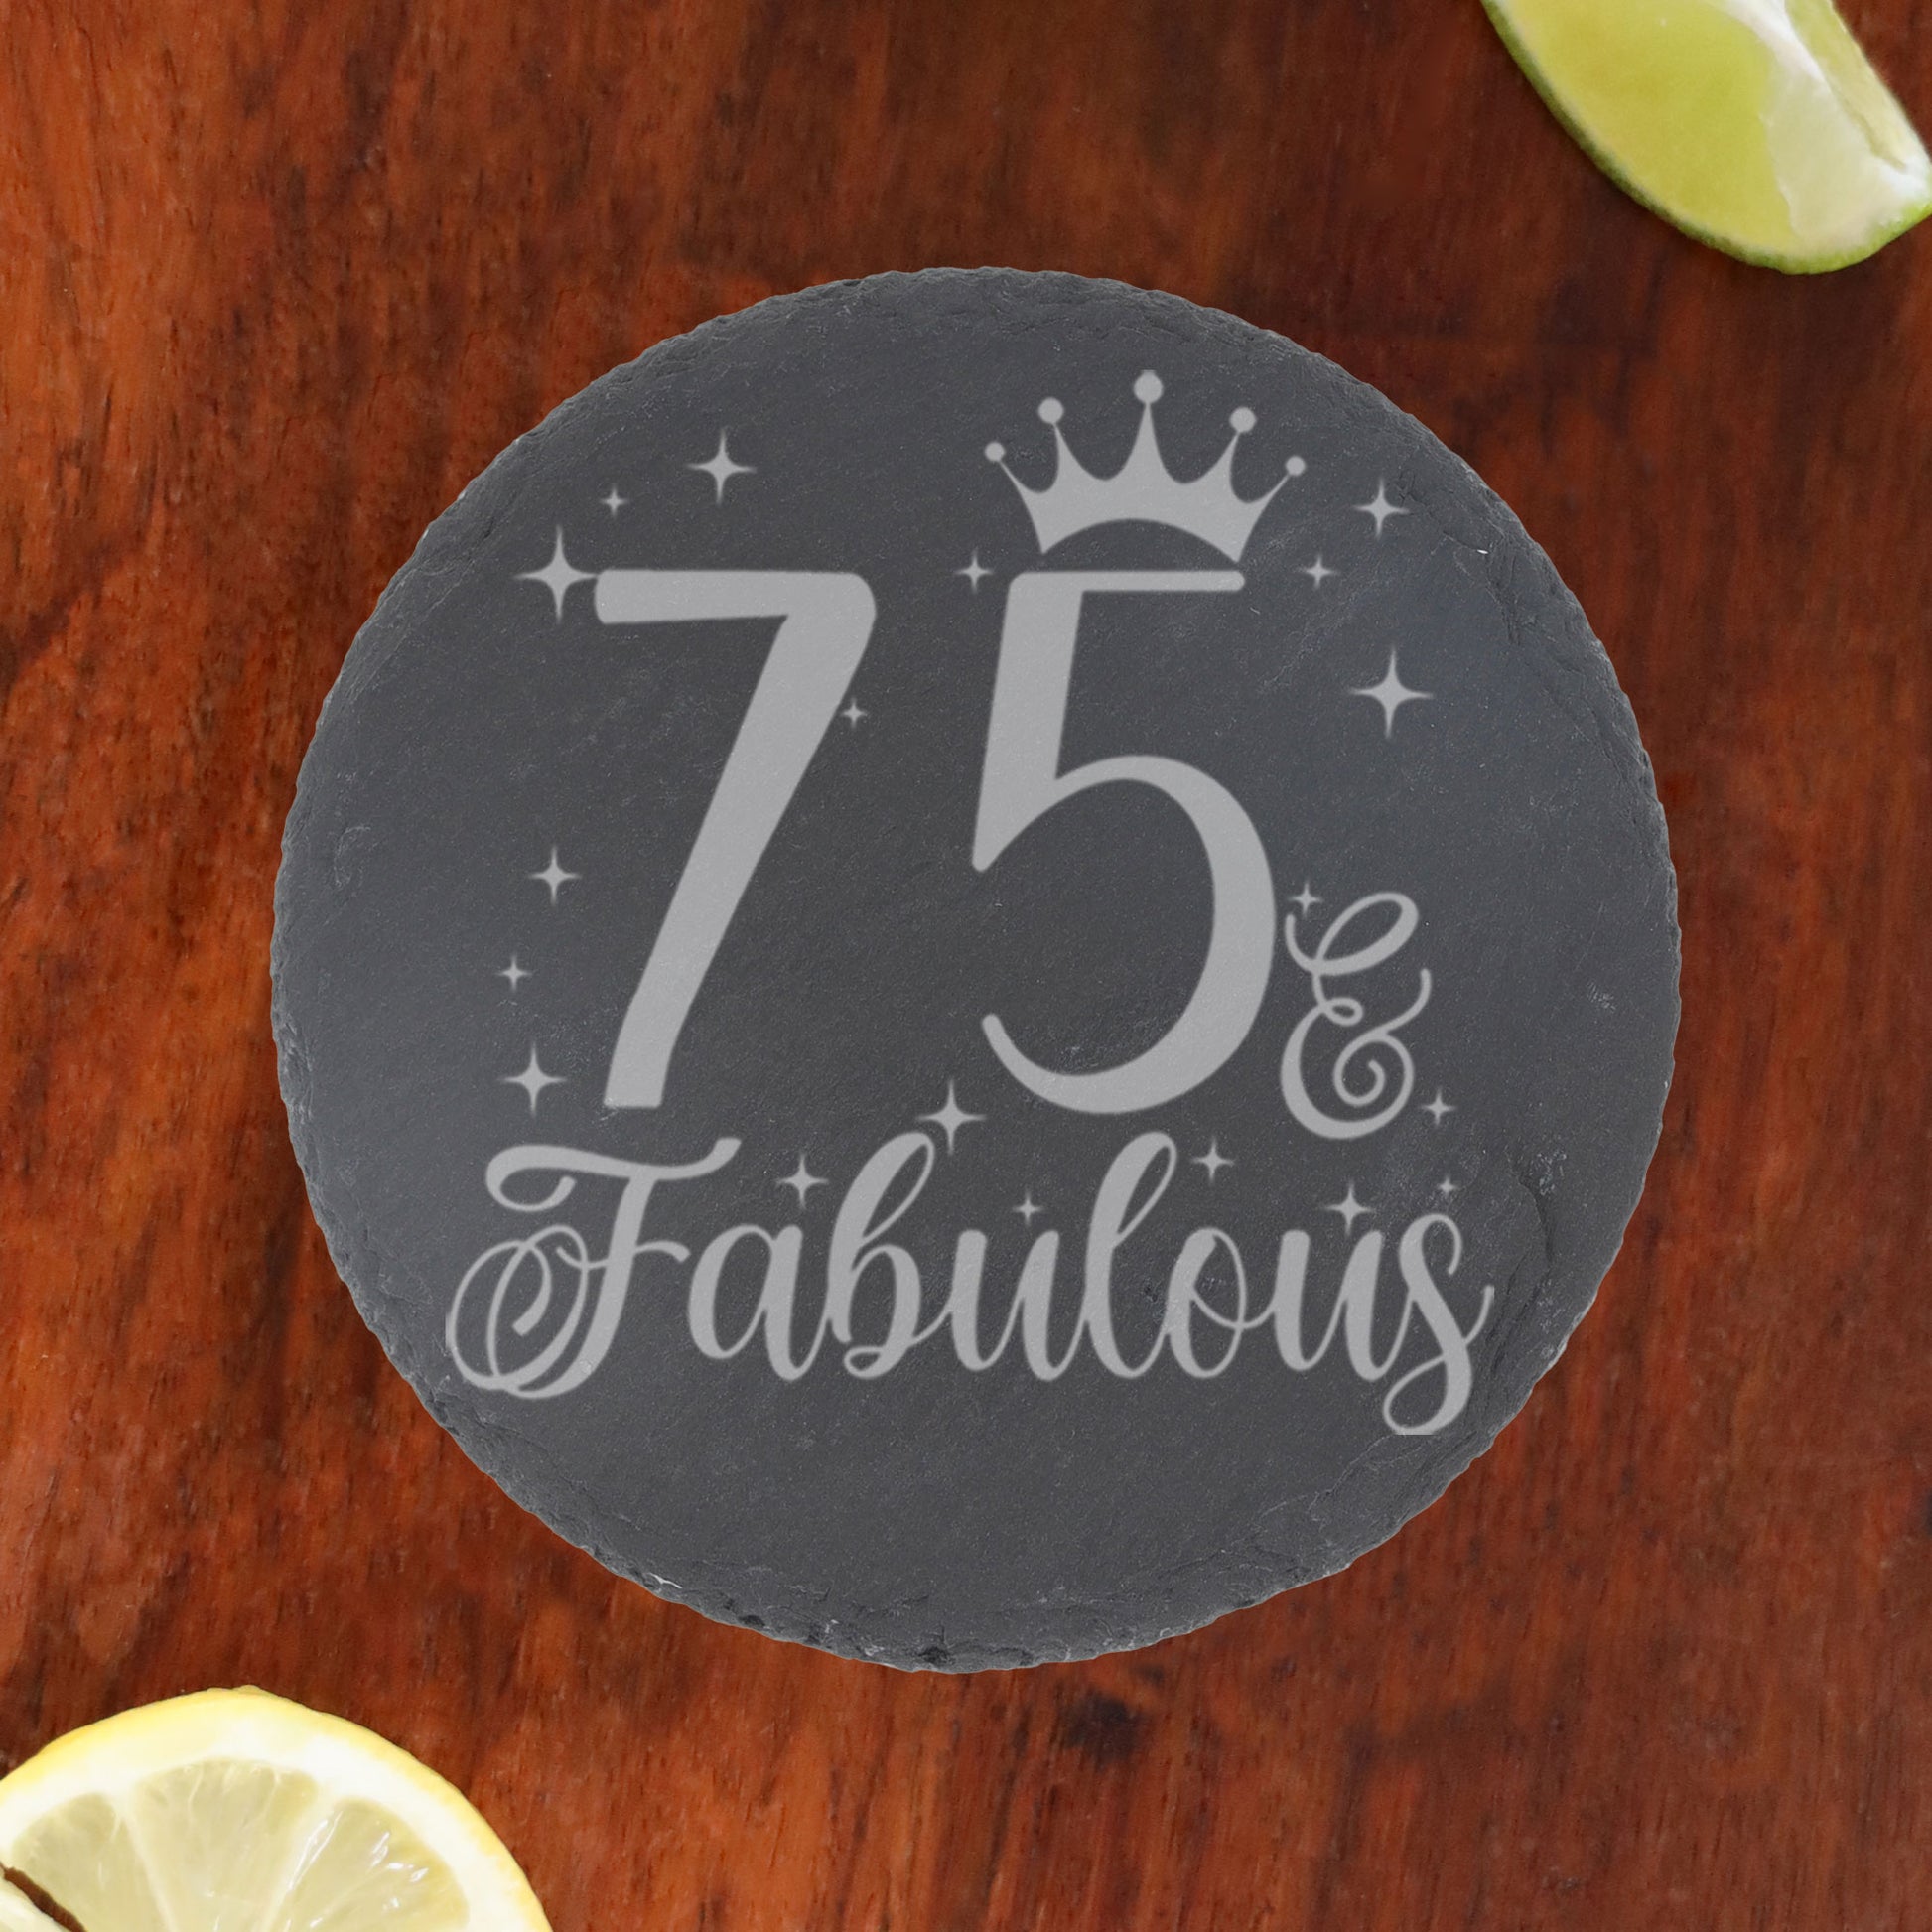 75 & Fabulous 75th Birthday Gift Engraved Wine Glass and/or Coaster Set  - Always Looking Good - Round Coaster Only  